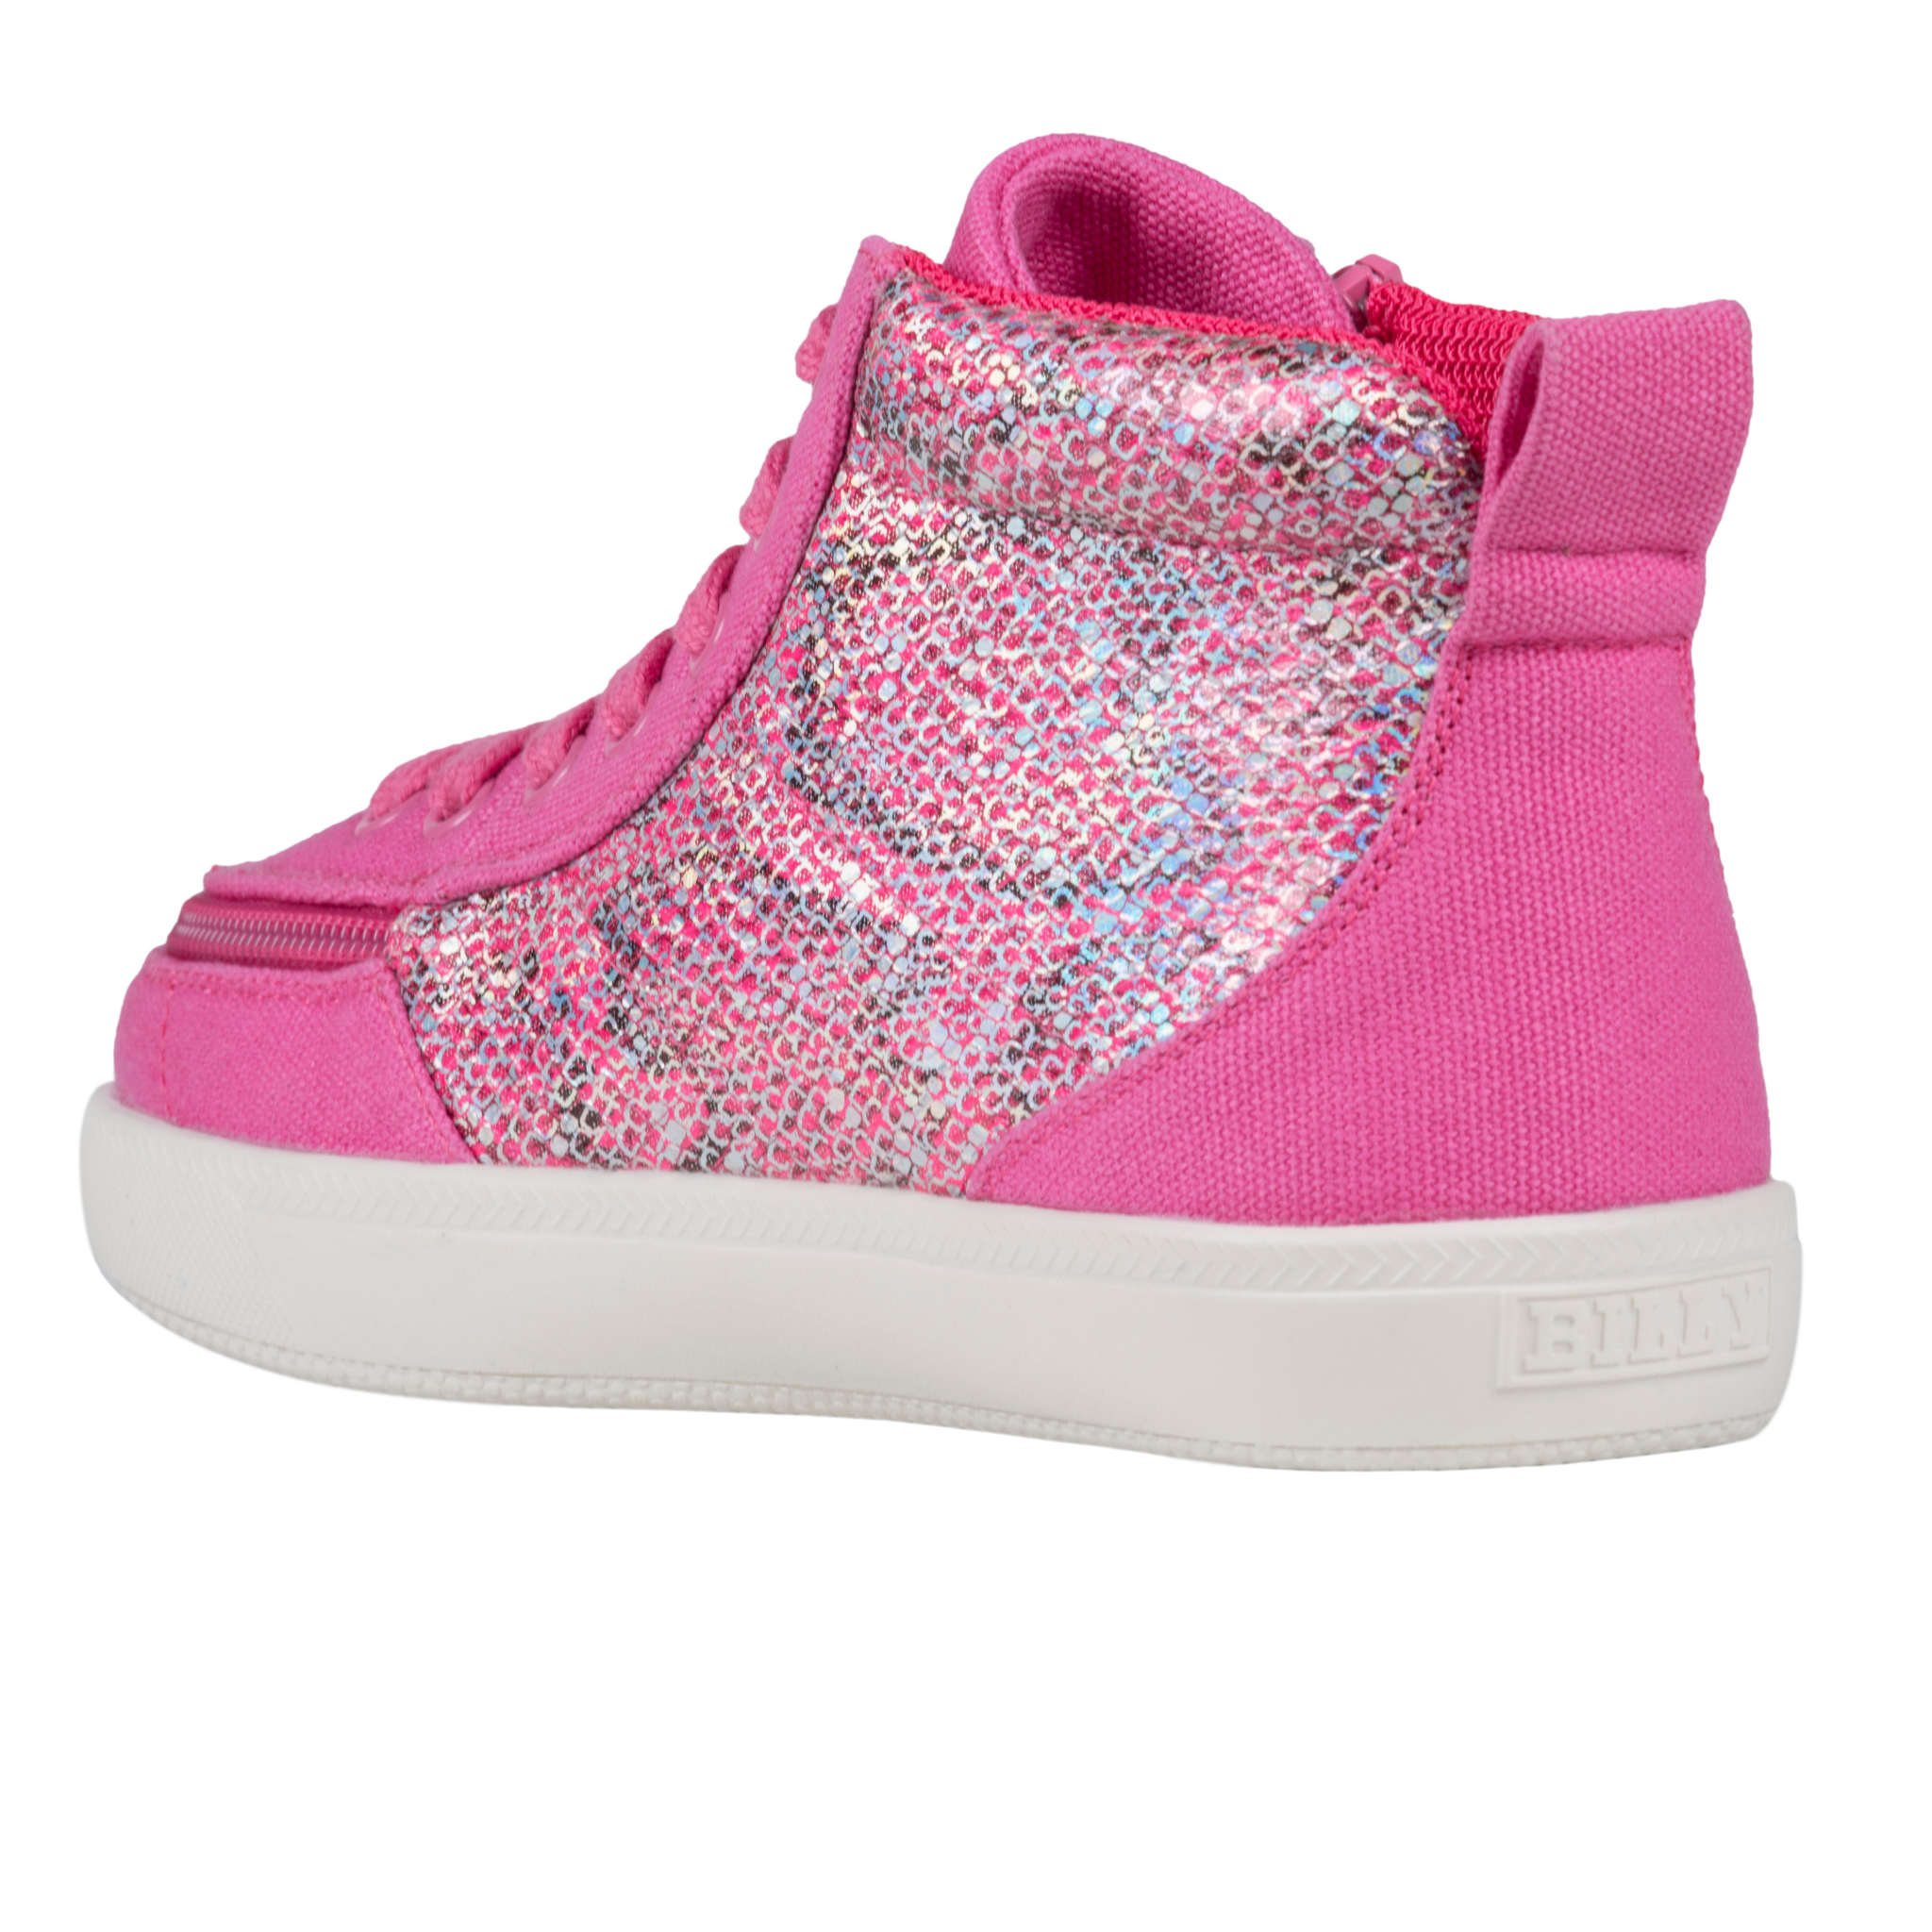 Billy Footwear (Kids) DR Fit - Street High Top DR Fuchsia Snake Canvas Shoes